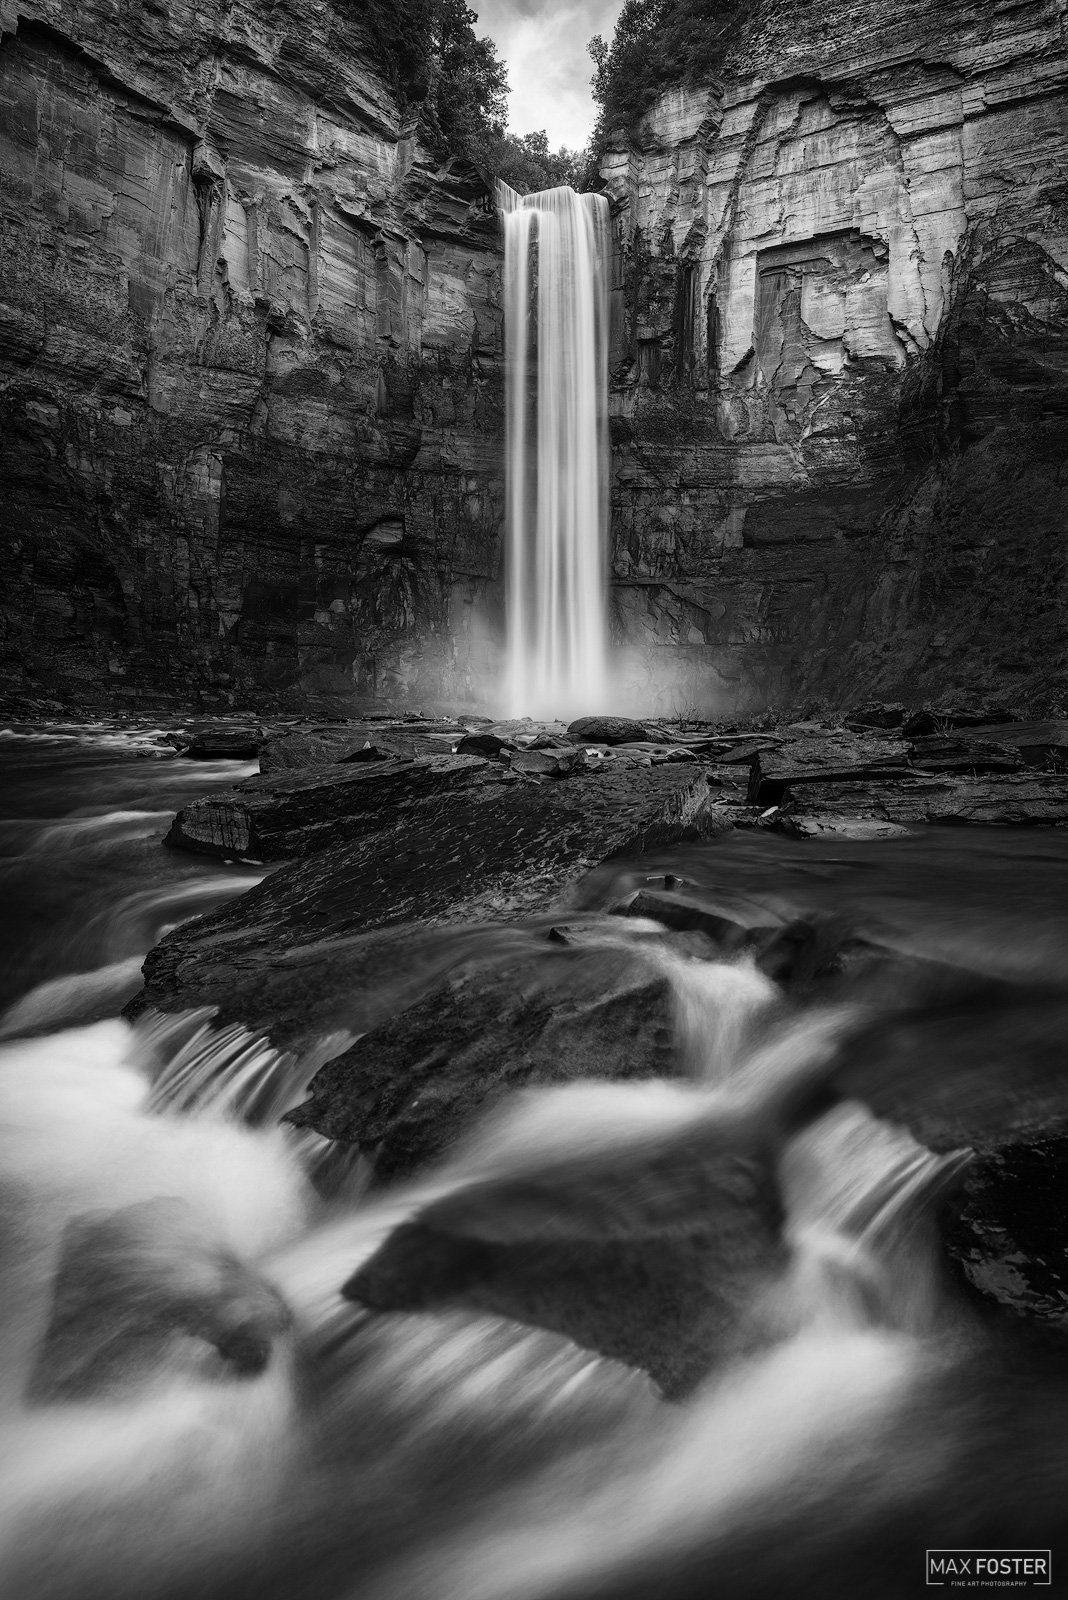 Bring nature into your home with Free Fall, Max Foster's limited edition photography print of Taughannock Falls in New York from...